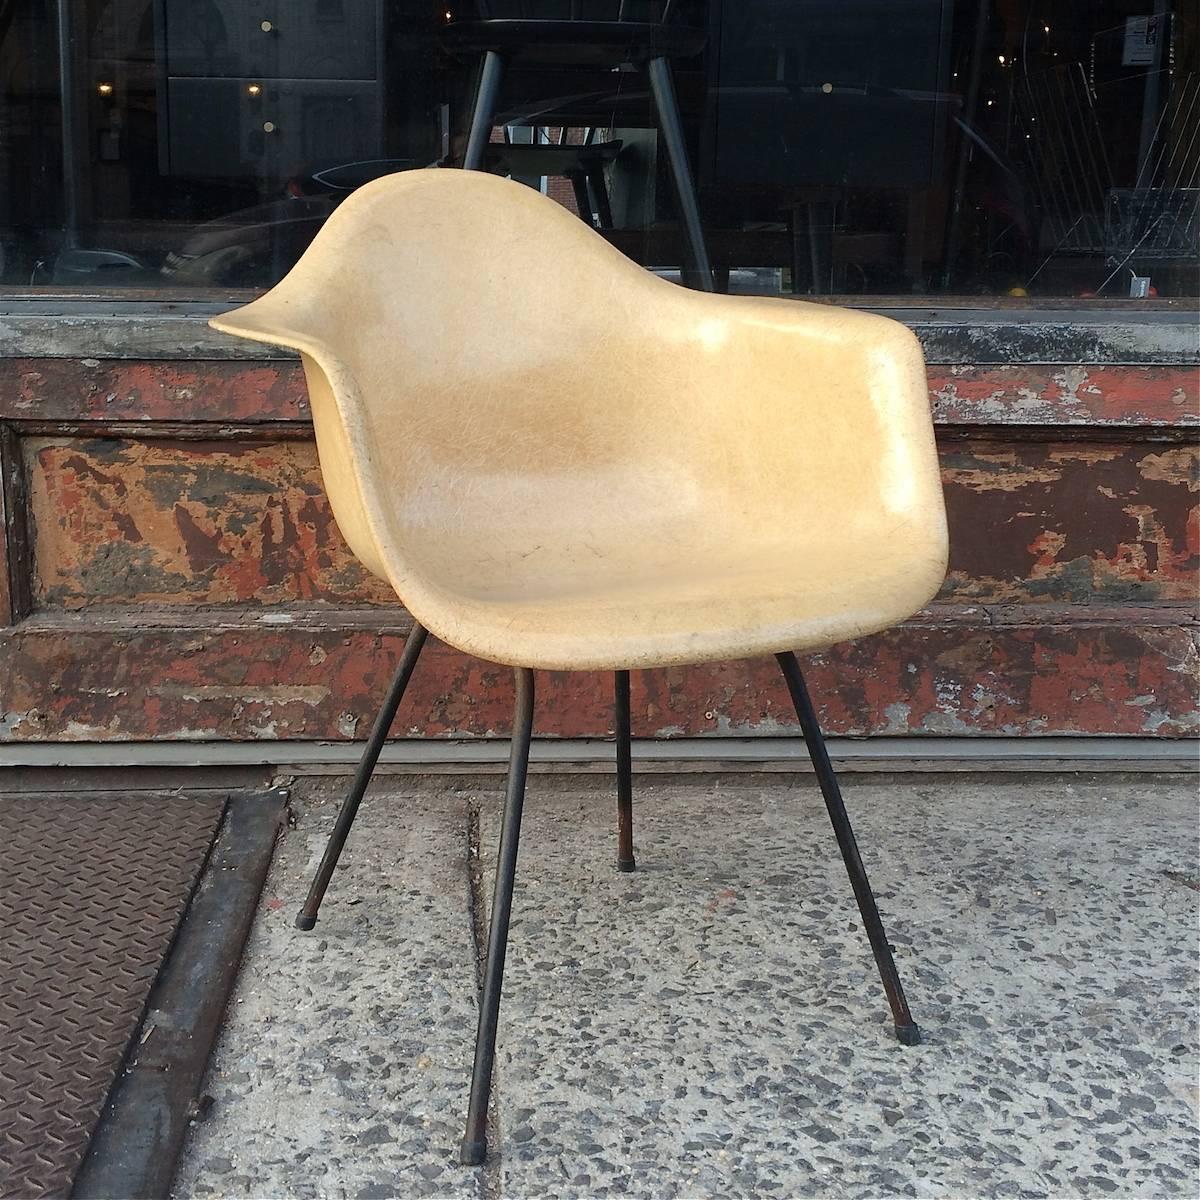 Fiberglass shell chair by Eames for Herman Miller in all original condition.